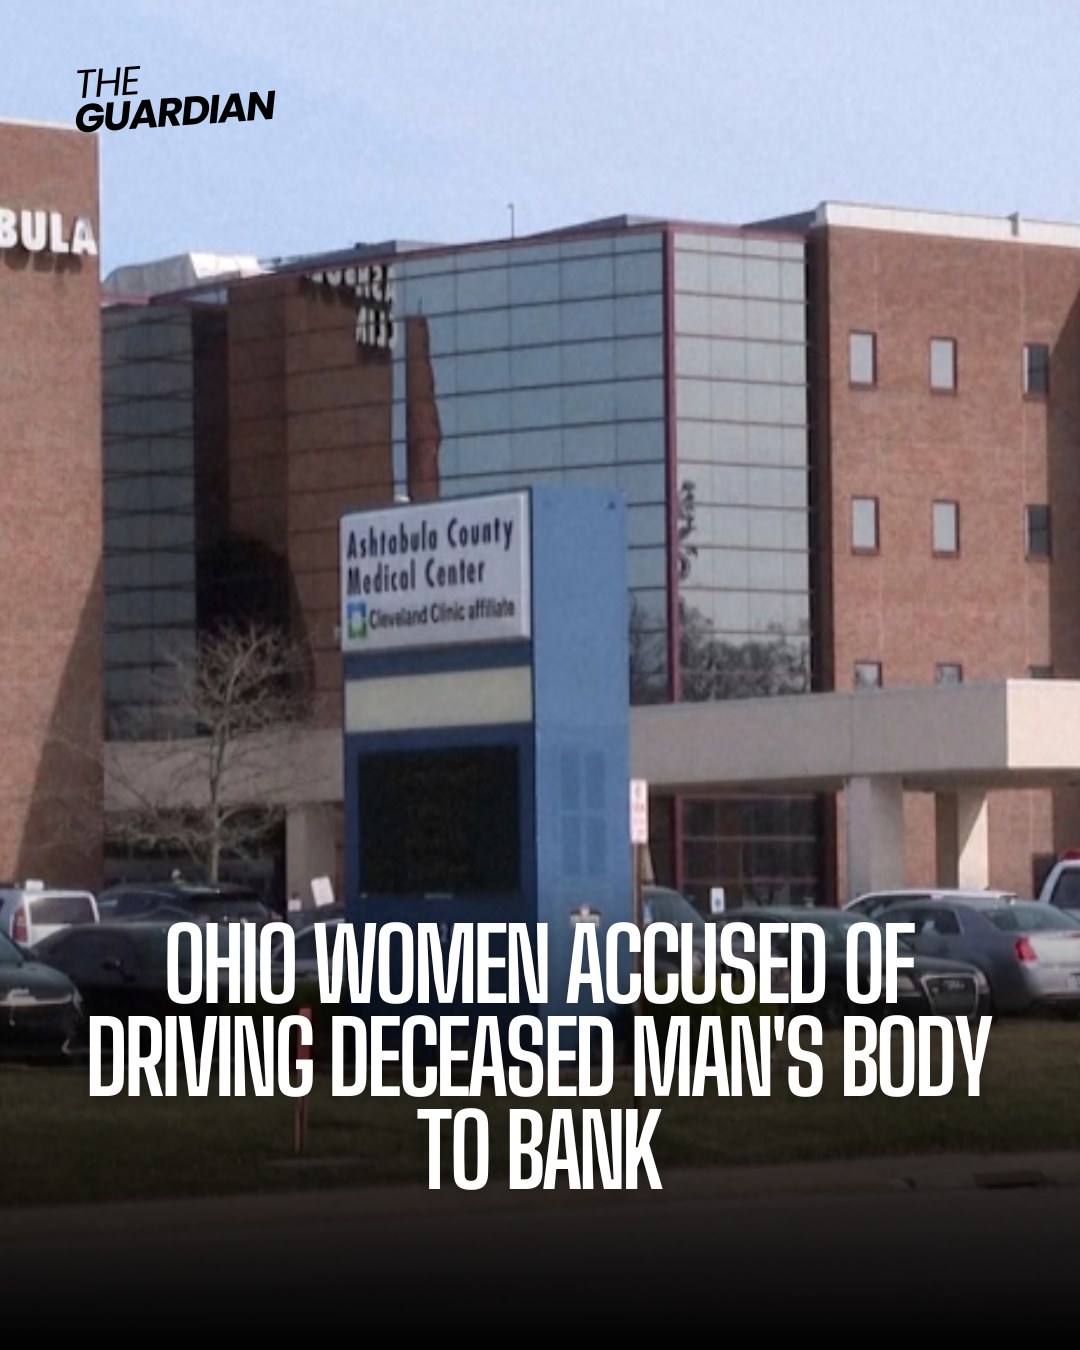 Two Ohio women have been charged with gross abuse of a body and stealing from a person in a protected class.